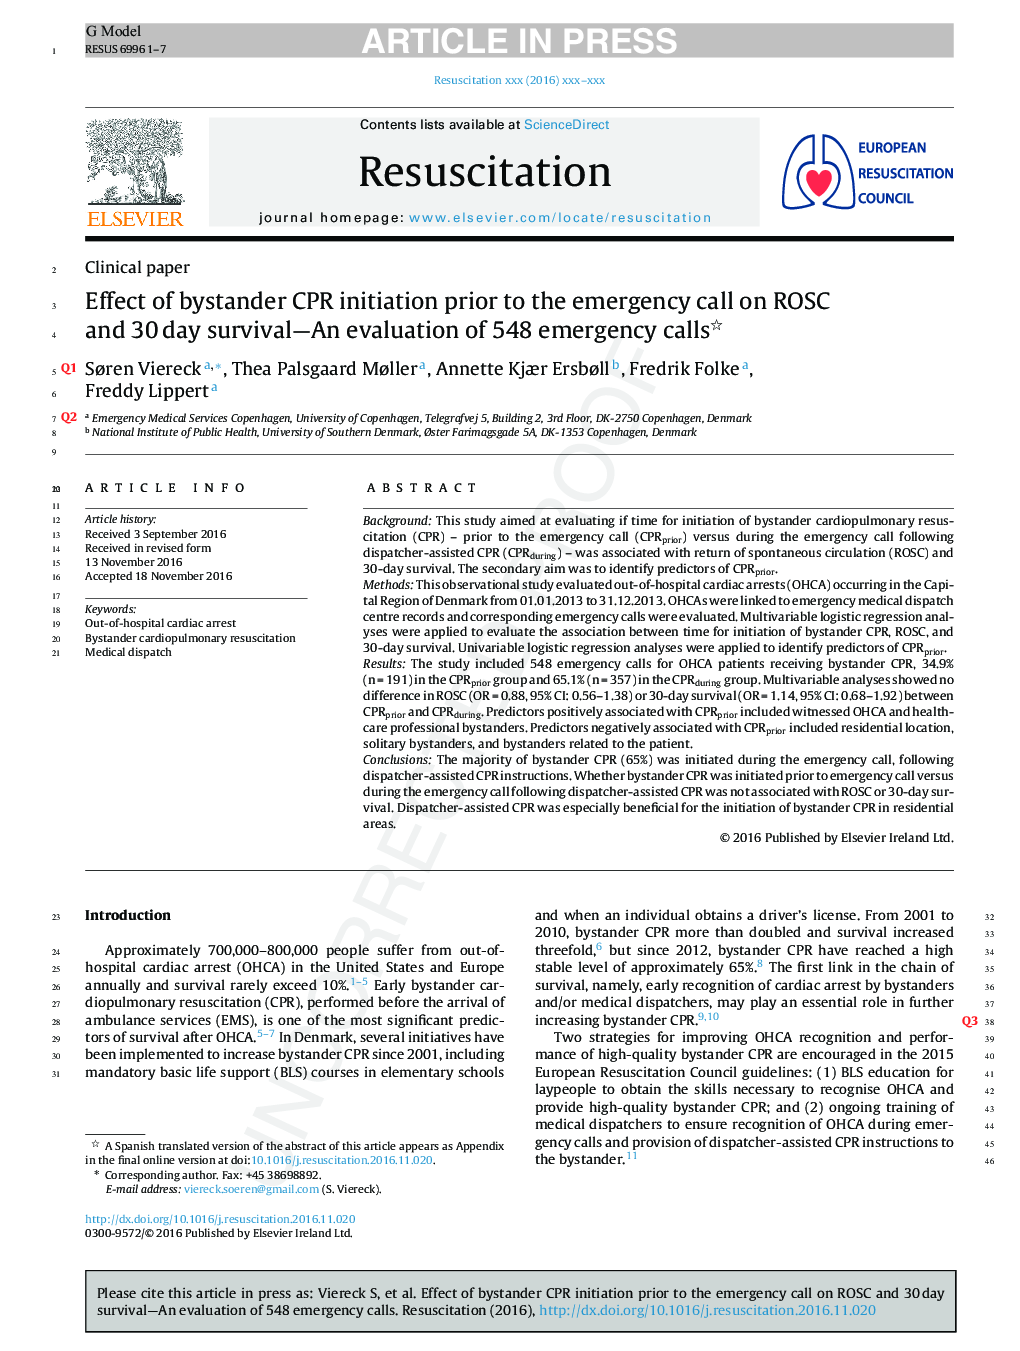 Effect of bystander CPR initiation prior to the emergency call on ROSC and 30Â day survival-An evaluation of 548 emergency calls